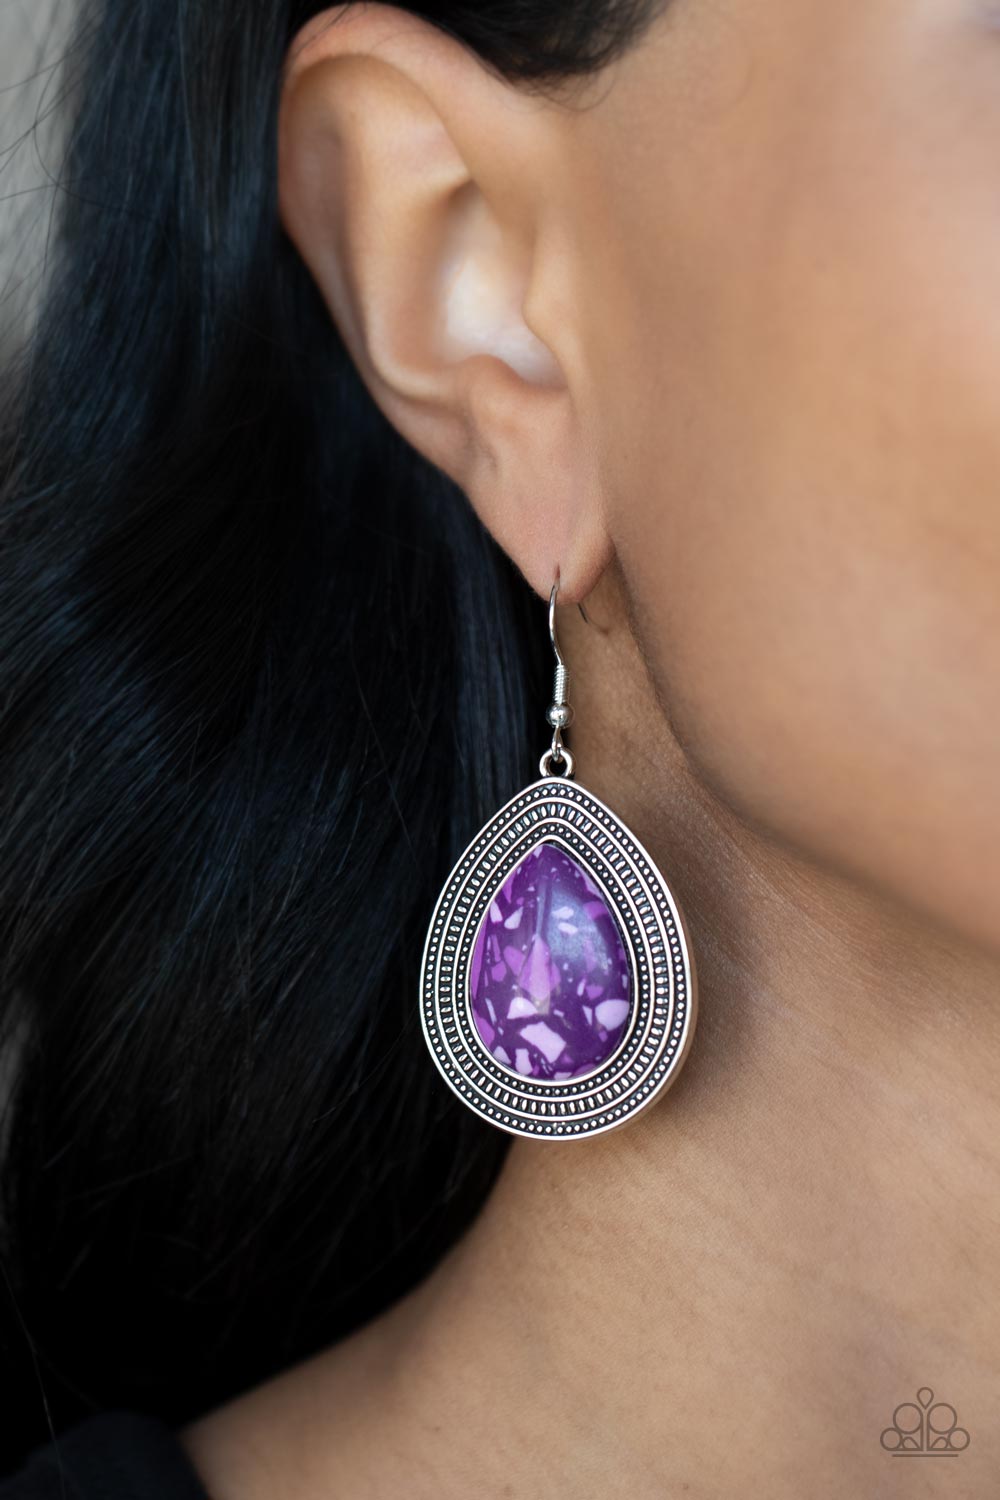 Terrazzo Tundra - Purple and Silver Earrings - Paparazzi Accessories - Featuring a colorful terrazzo pattern, a purple teardrop stone is pressed into the center of a silver frame studded and embossed in borders of tribal inspired textures. Earring attaches to a standard fishhook fitting. Sold as one pair of earrings.